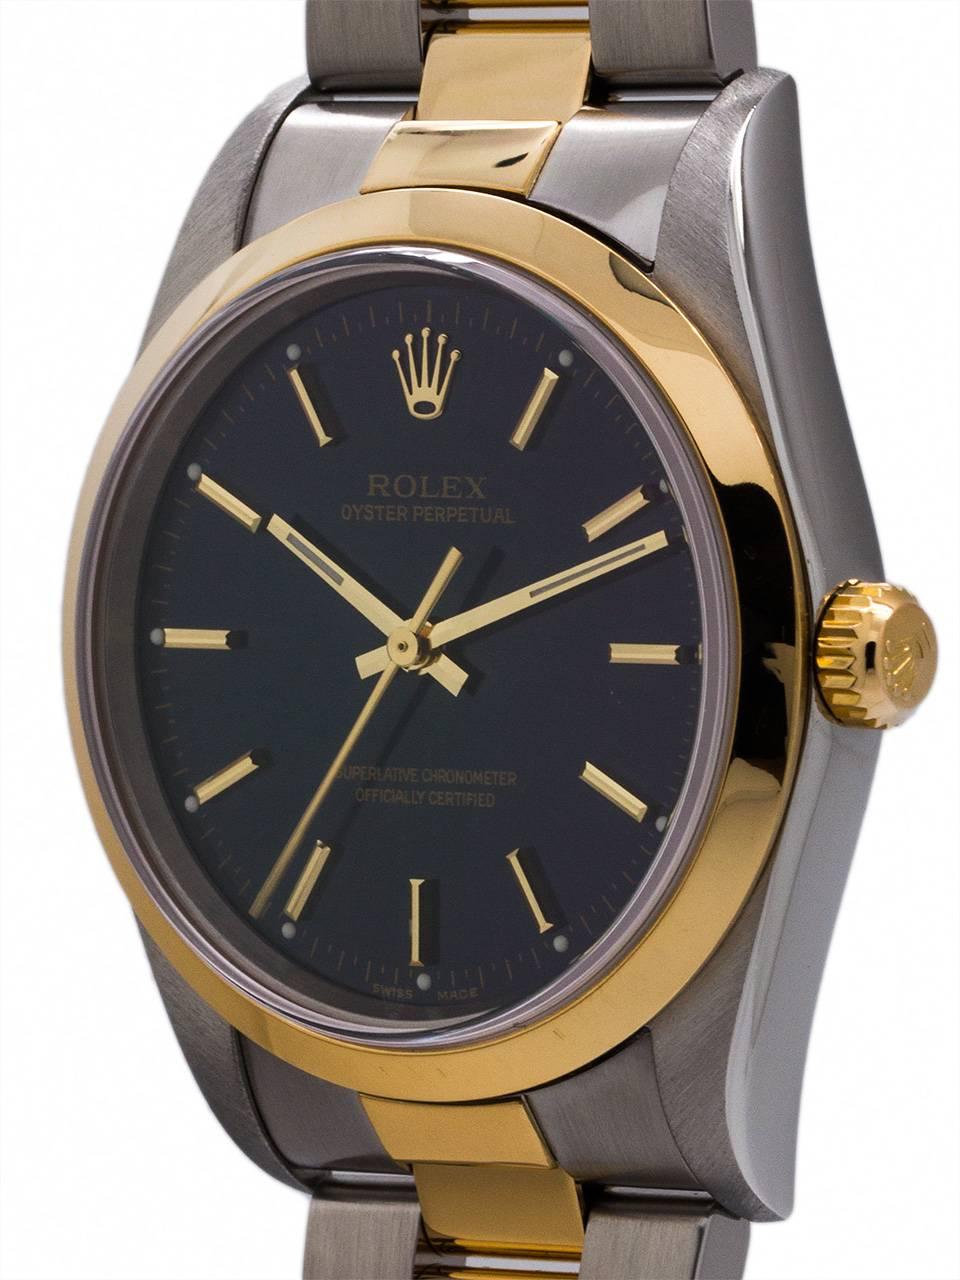 Rolex Man’s  SS/18K YG Oyster Perpetual ref# 14203 serial# D5 circa 2003. Featuring a 34mm case with smooth bezel, sapphire crystal, and  with original glossy blue dial with applied gold indexes and gilt baton hands. Featuring a man’s size 34mm